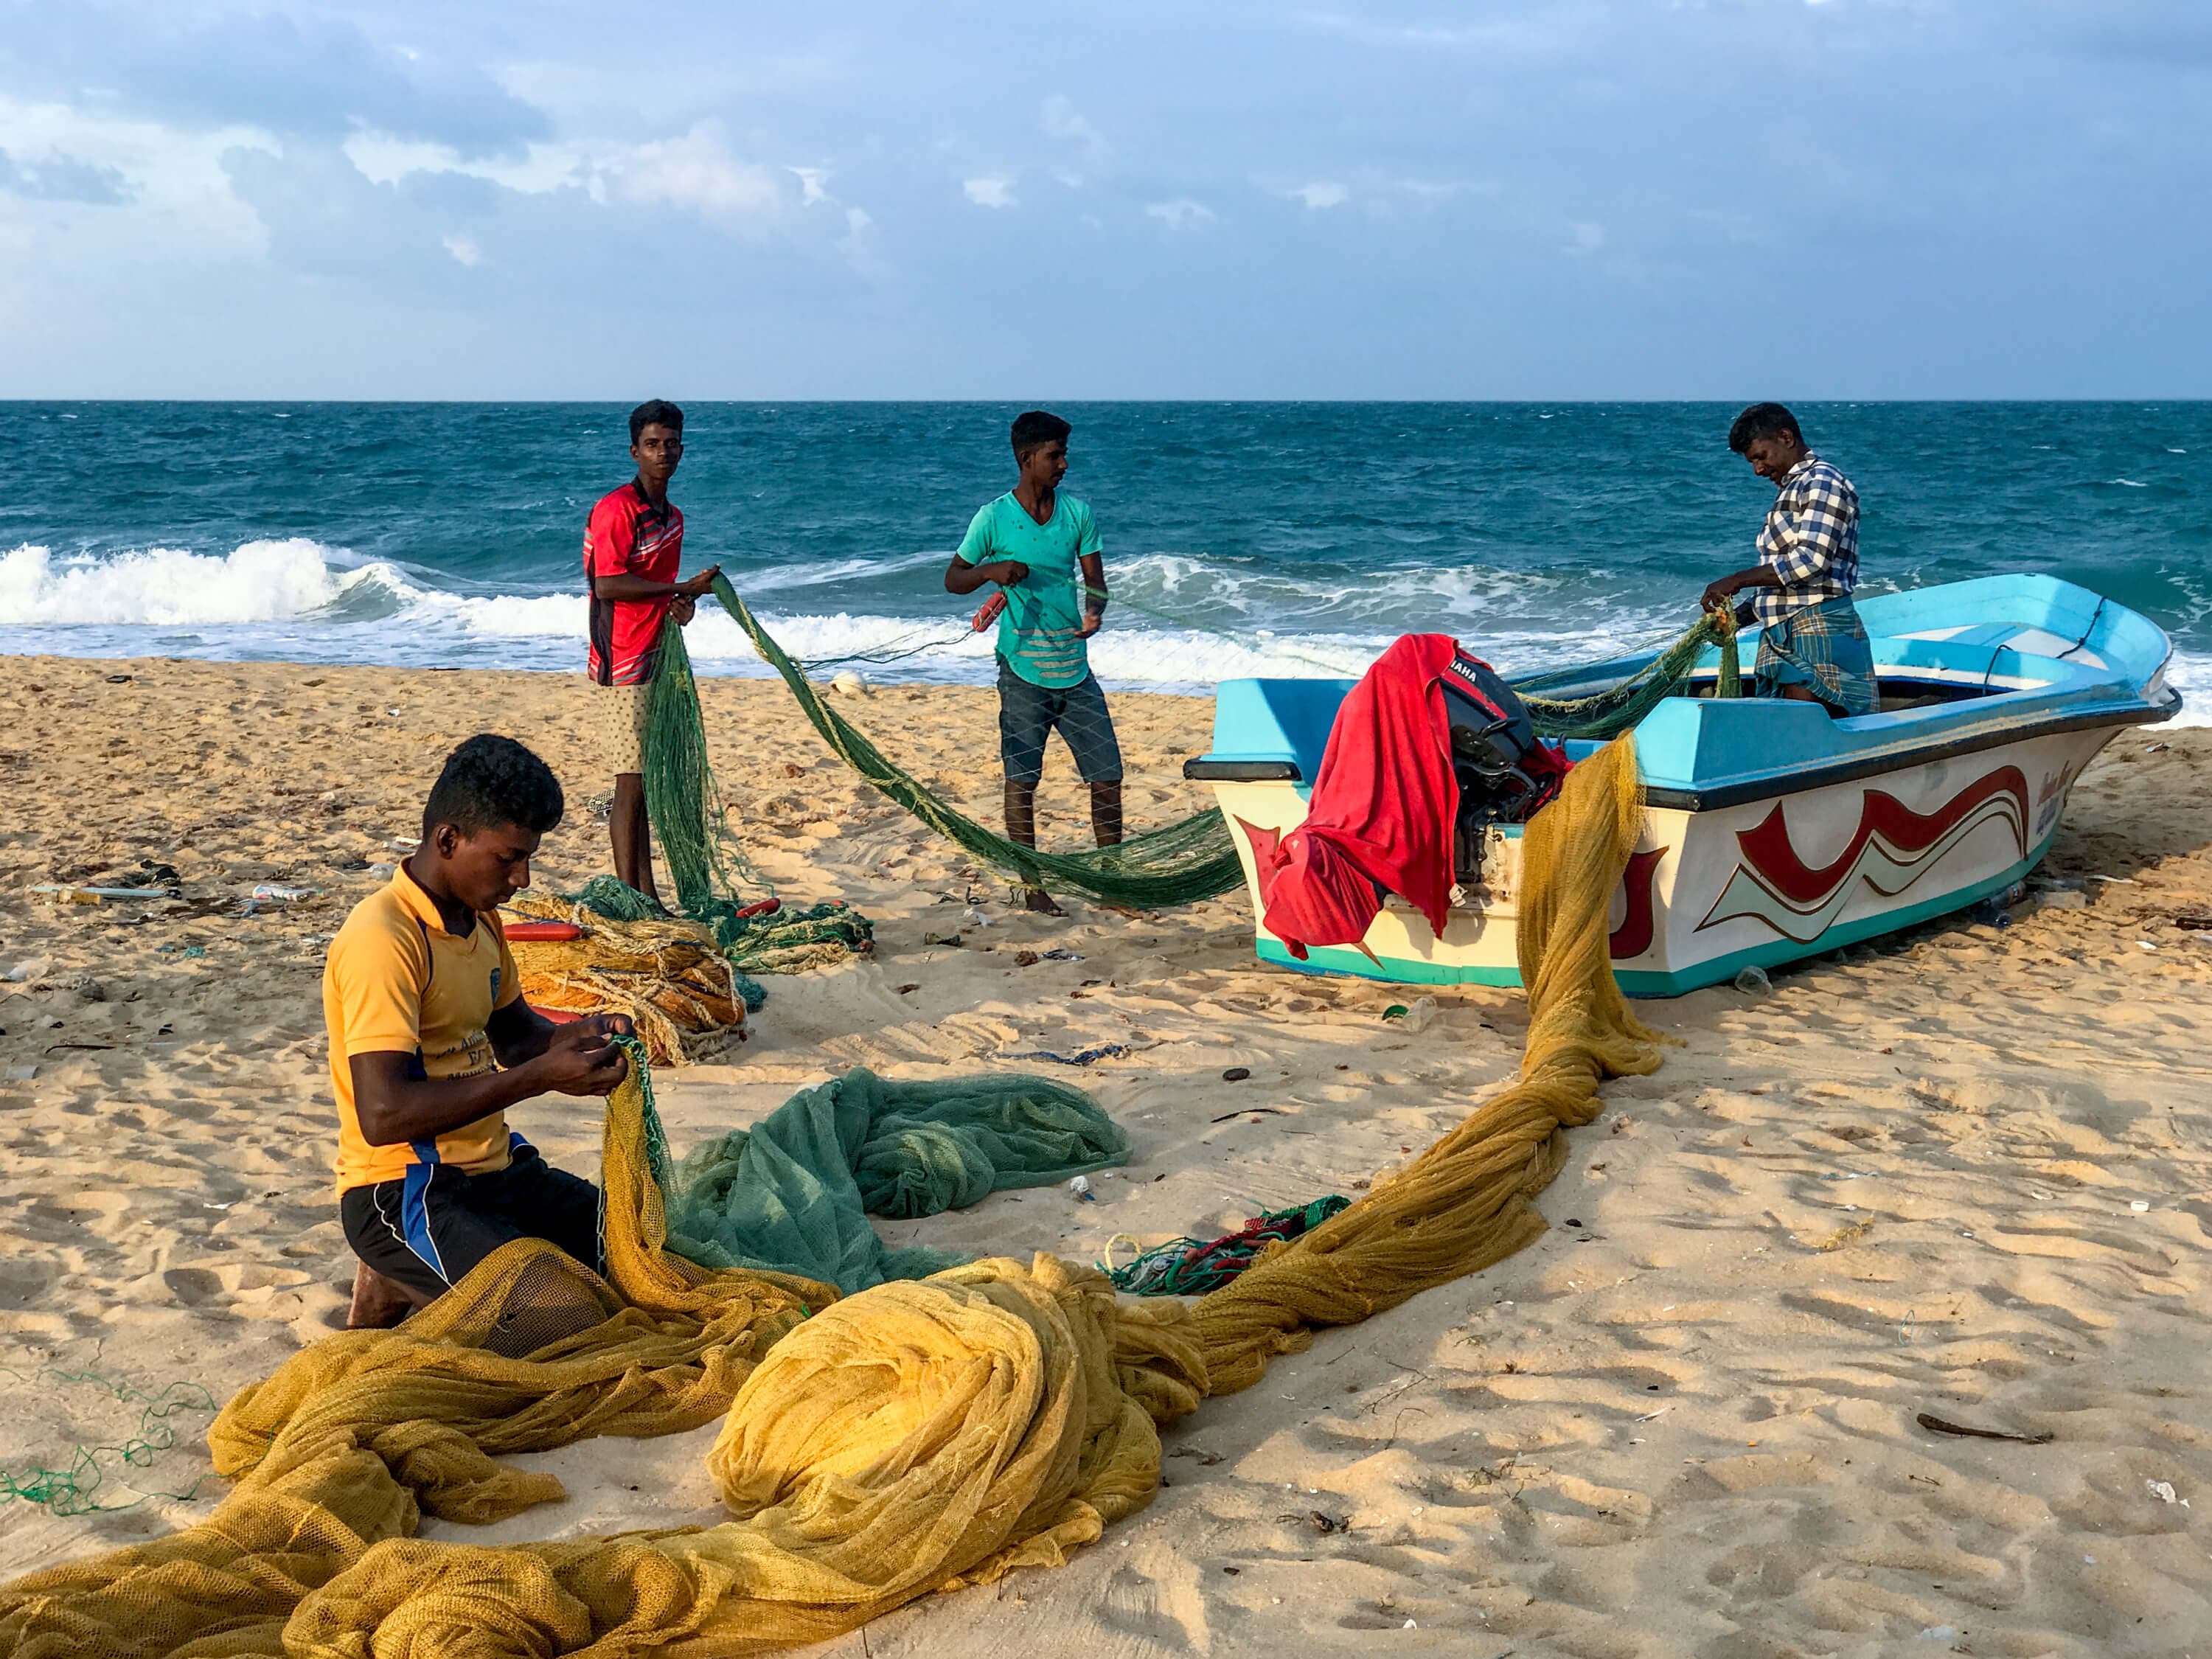 Get experience co-operation among the fishers while preparing fishing nets in Negombo Sri Lanka